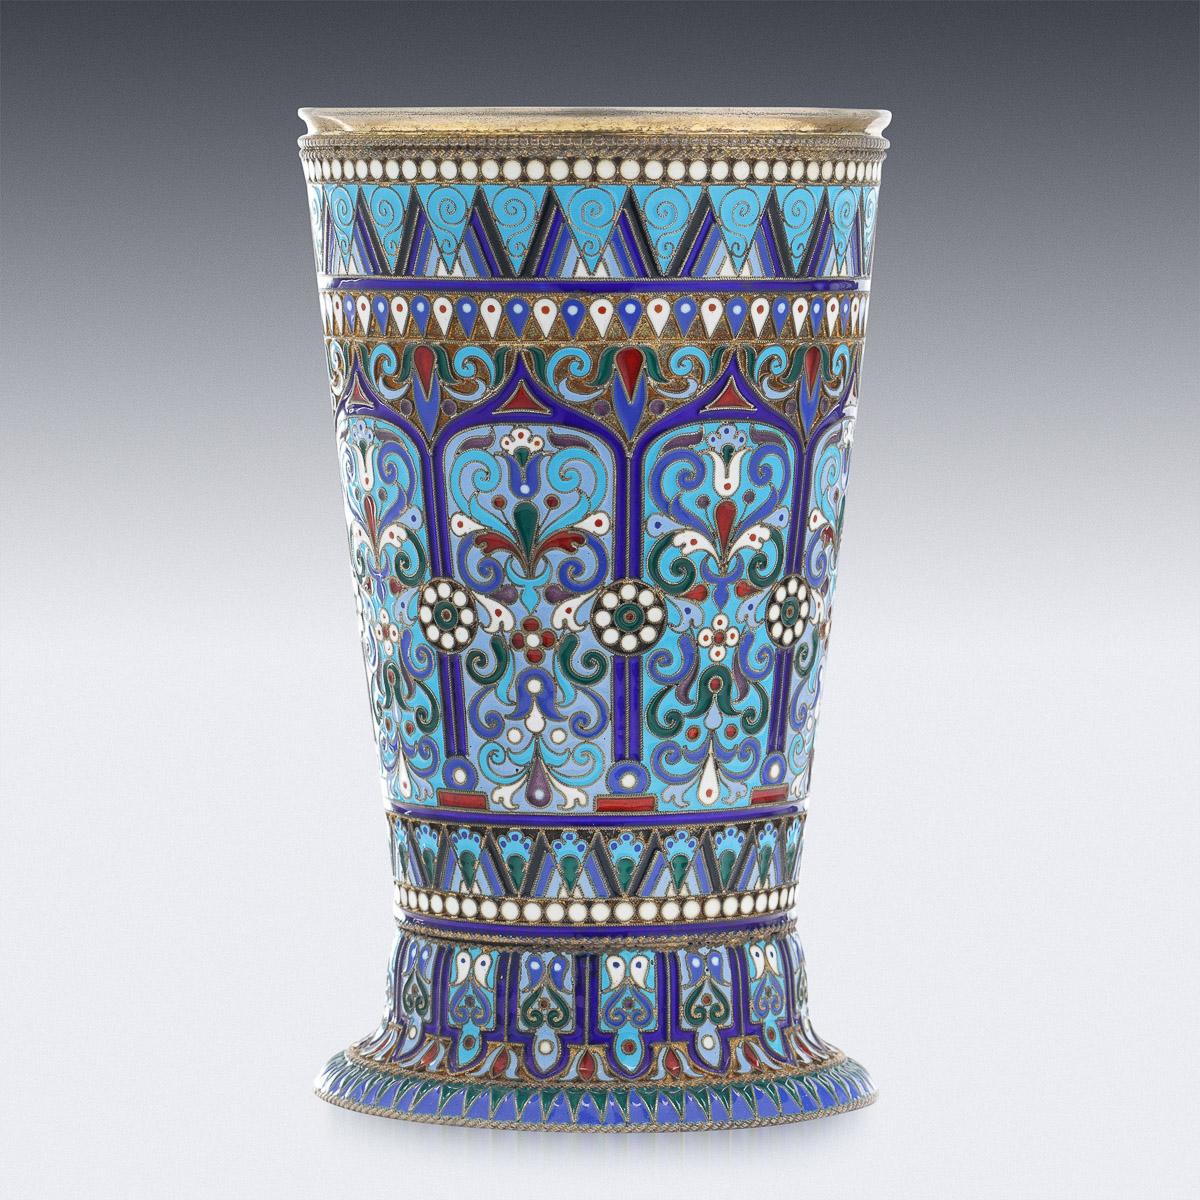 19th Century Imperial Russian silver-gilt & cloisonne enamel large beaker, designed upright with a spreading foot, the body profusely decorated with floral motifs in vary-coloured cloisonné enamel within borders of white pellets.
Hallmarked Russian